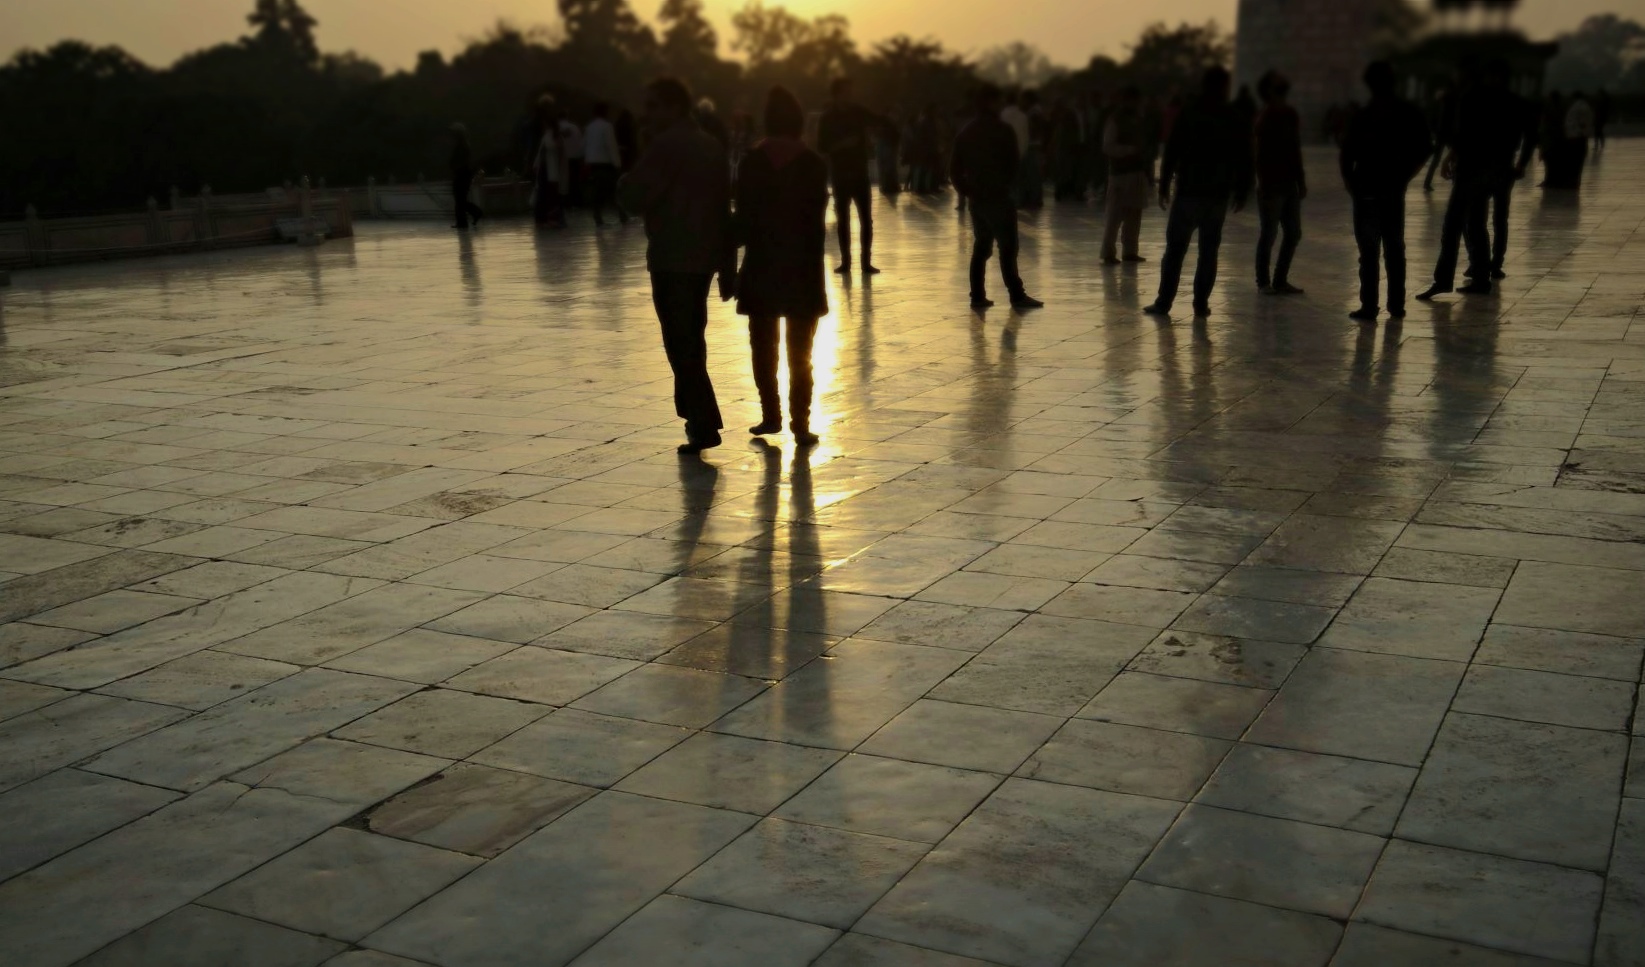 Dancers on the marble pavement